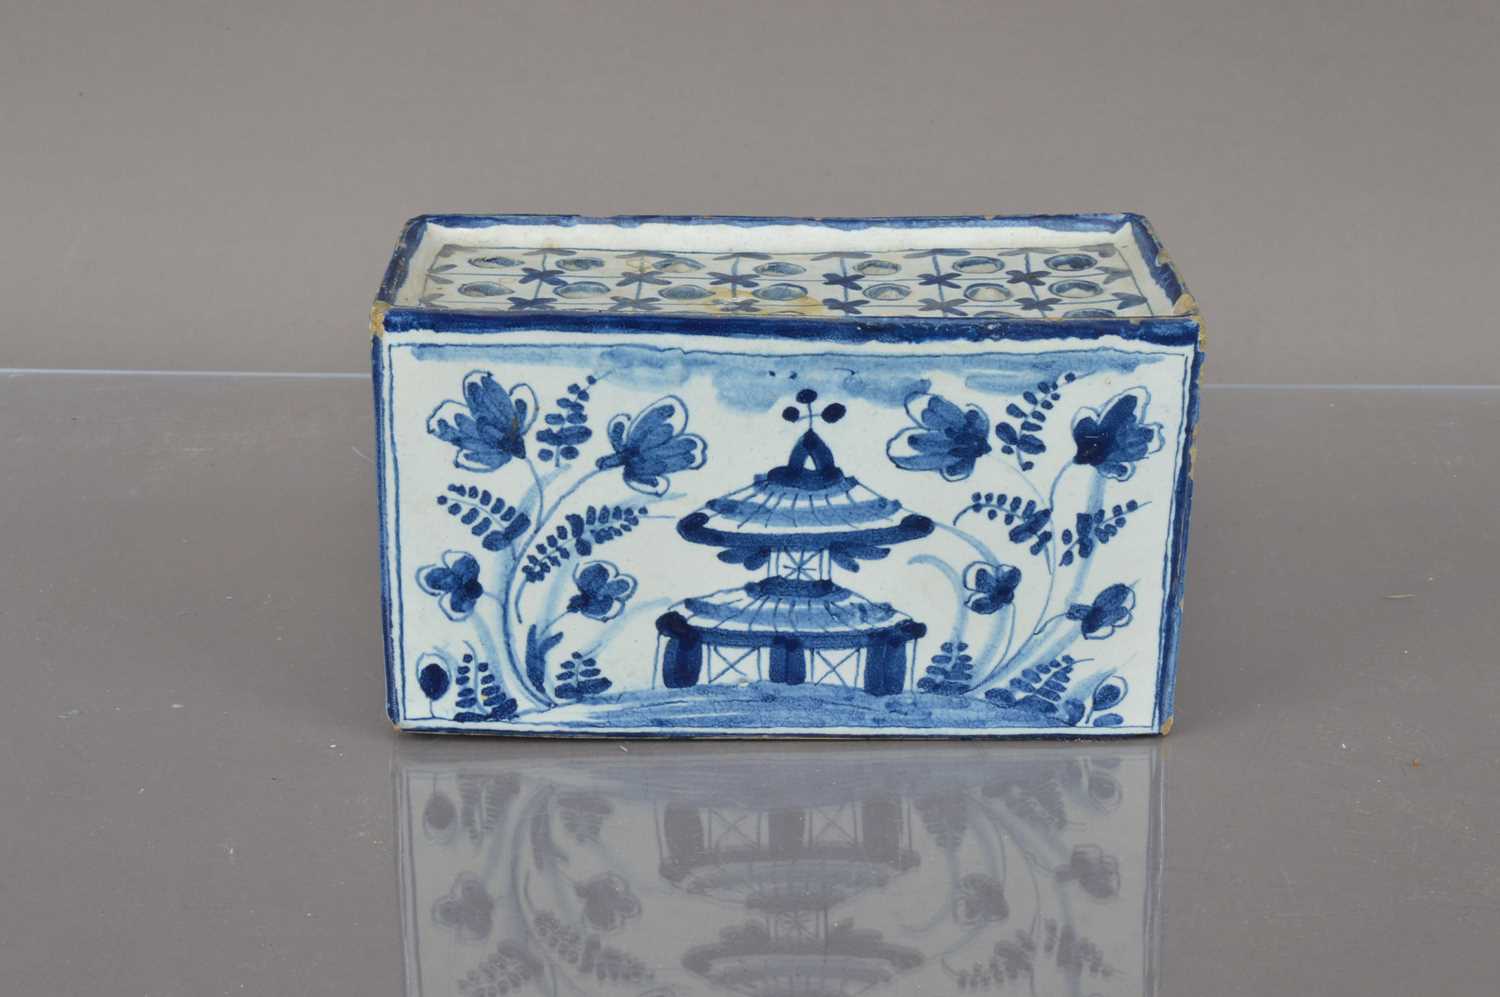 A Delft style blue and white pottery flower brick, - Image 2 of 4